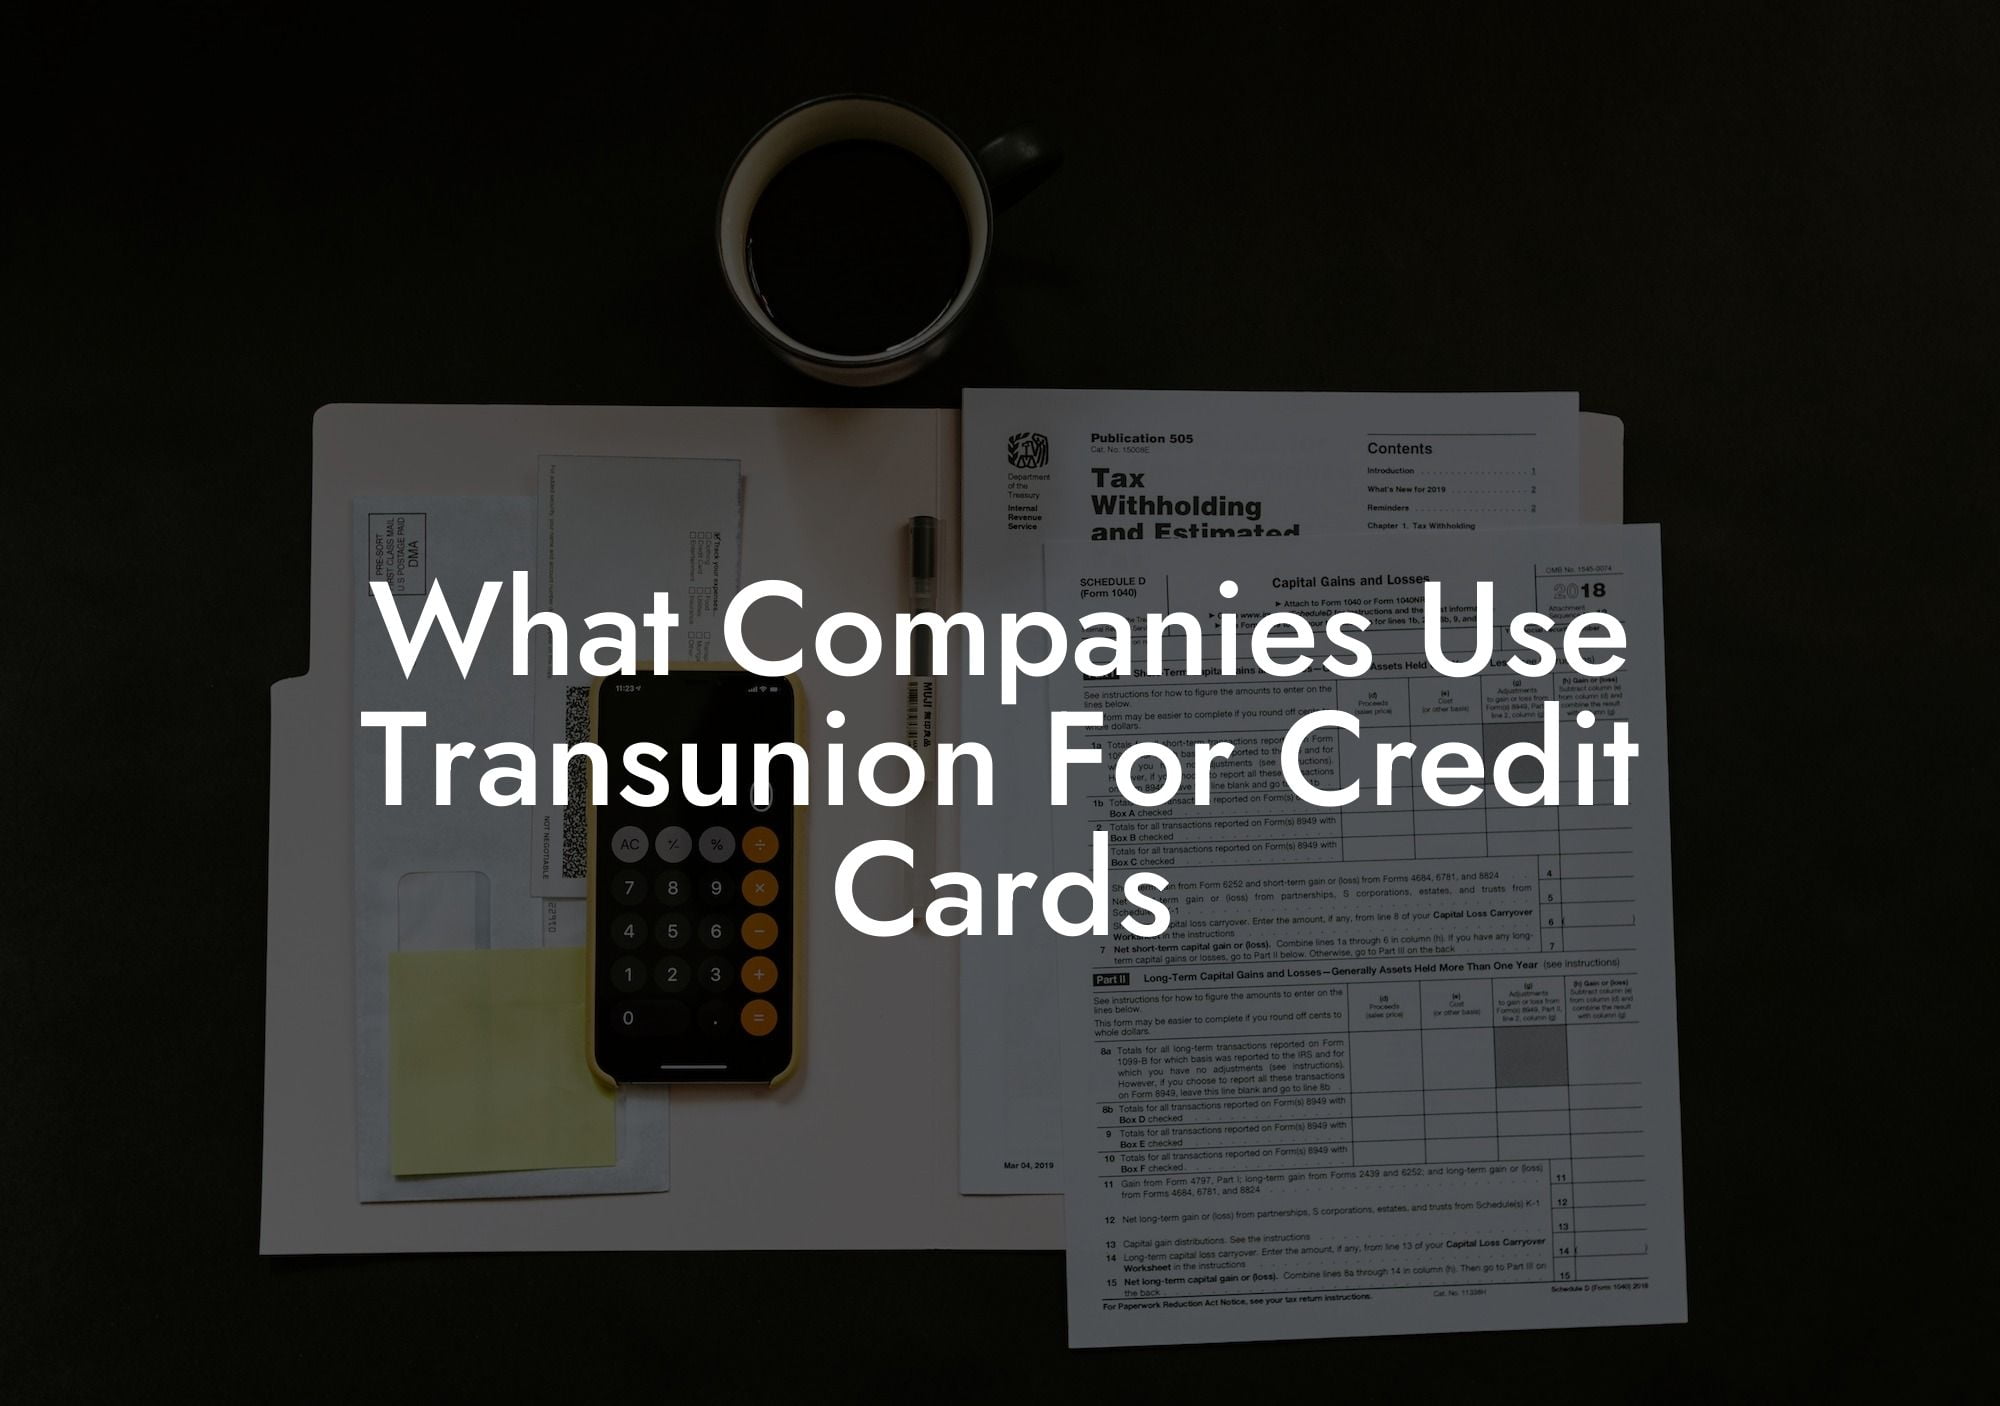 What Companies Use Transunion For Credit Cards